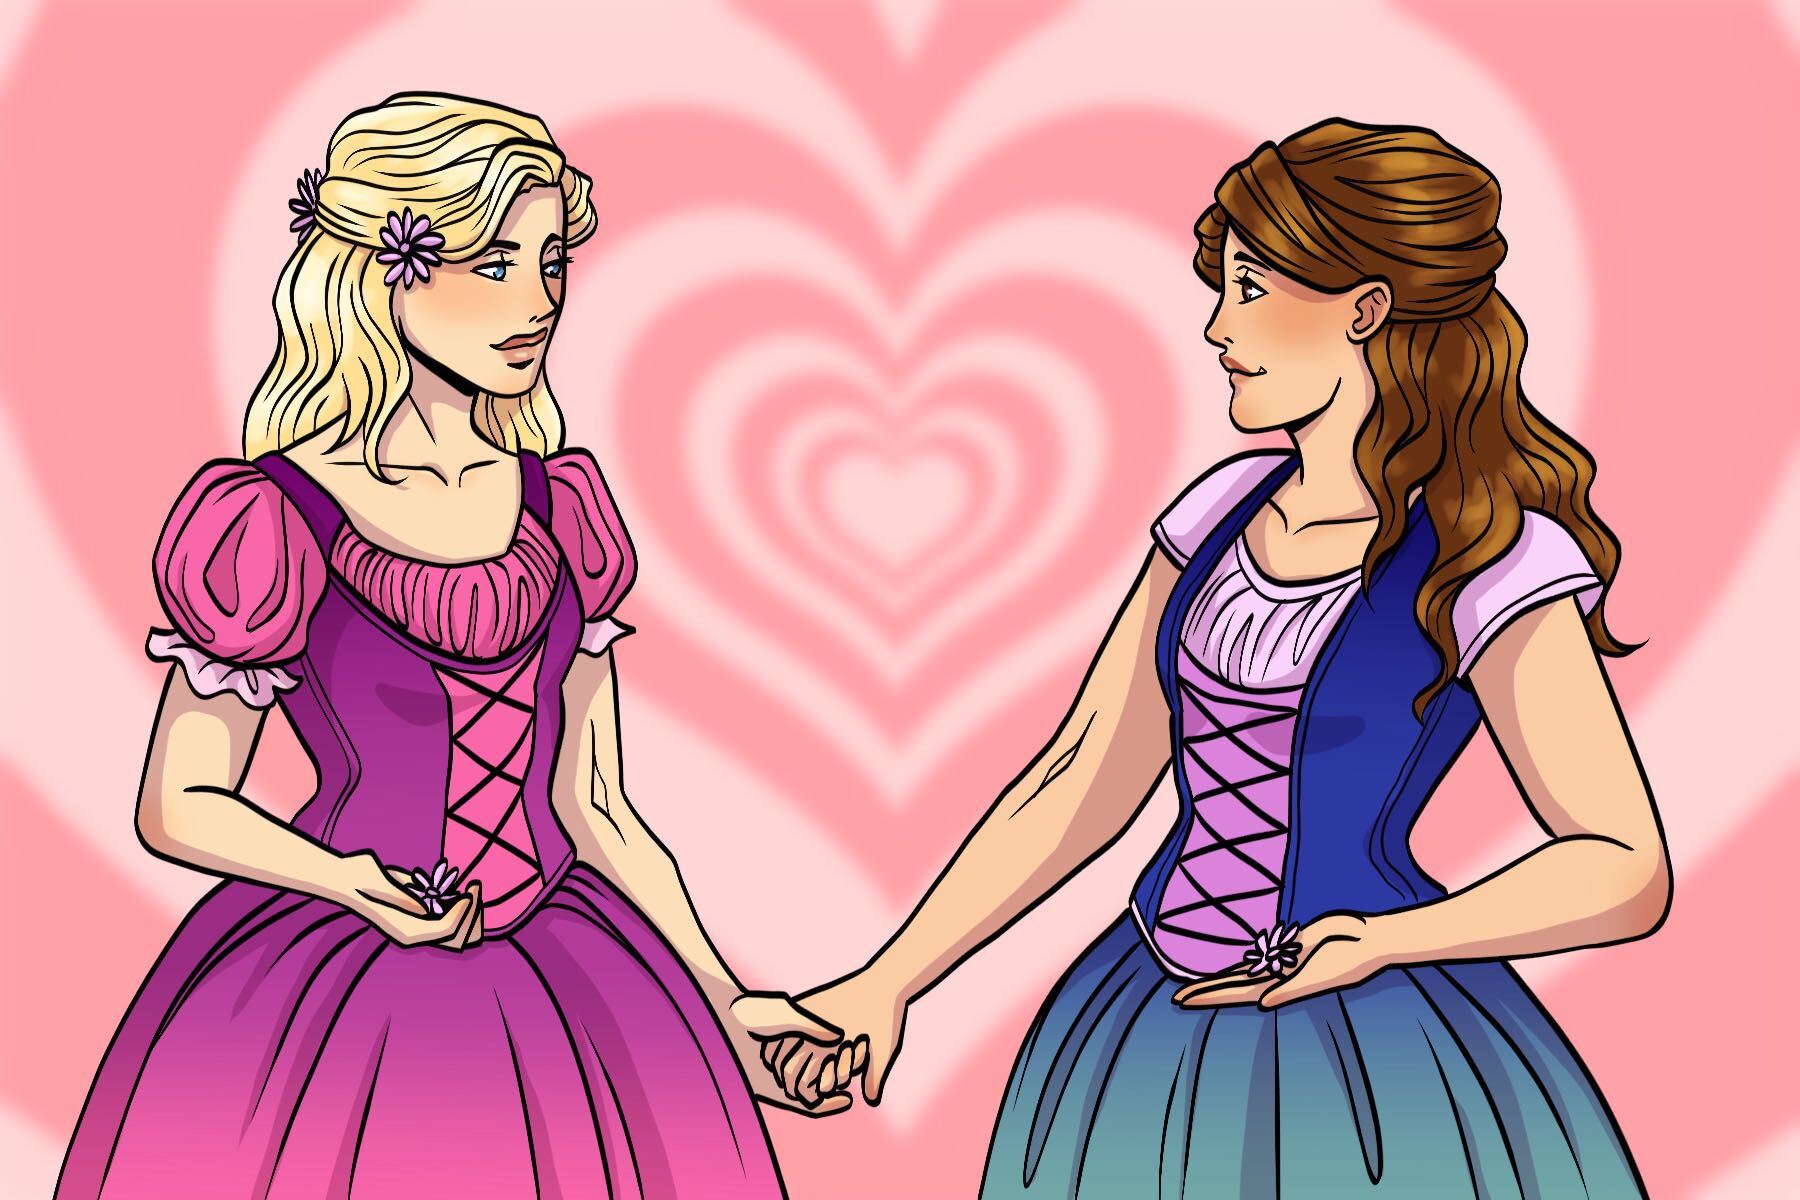 An illustration of the two main characters from the Barbie fiilm